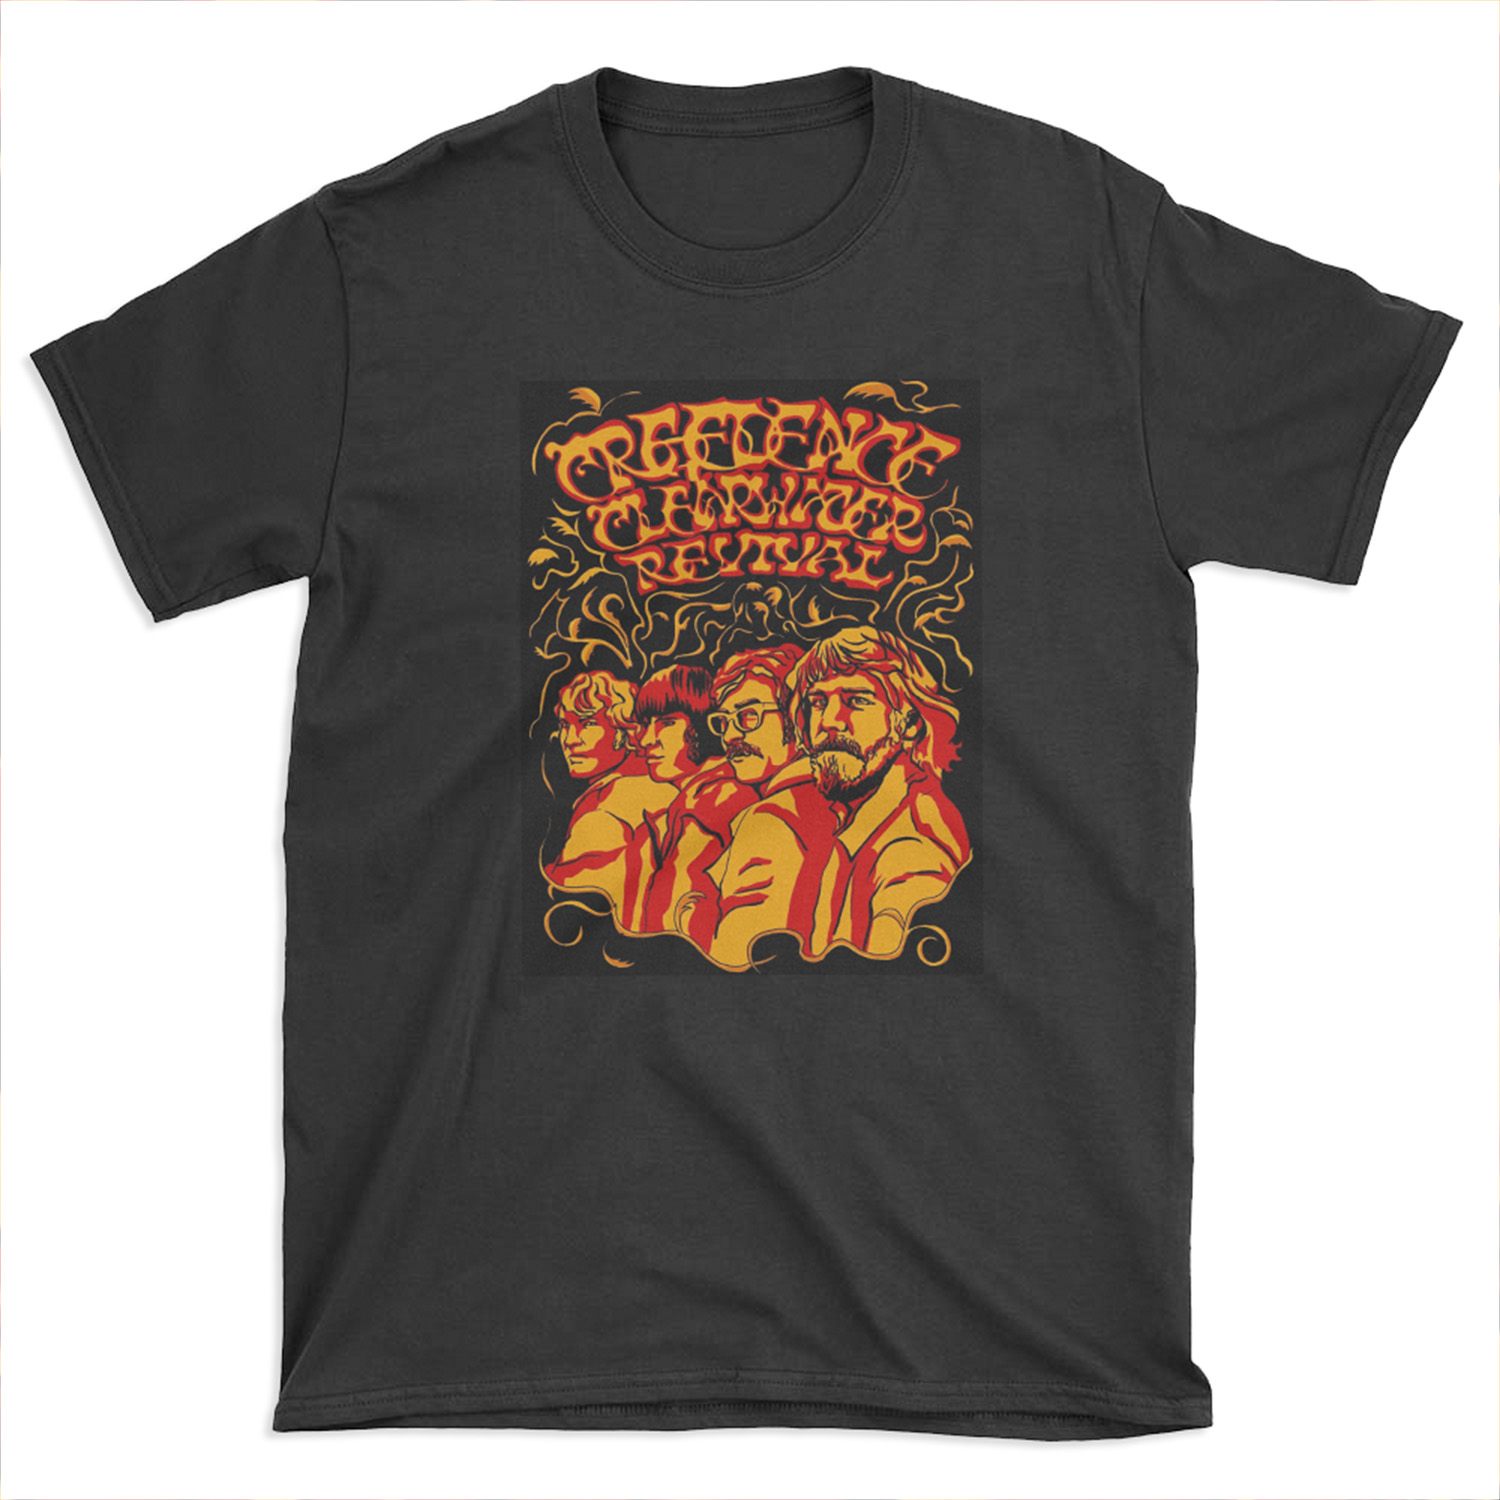 Creedence Clearwater Revival, CCR T-shirt Tee - Chief T-shirt